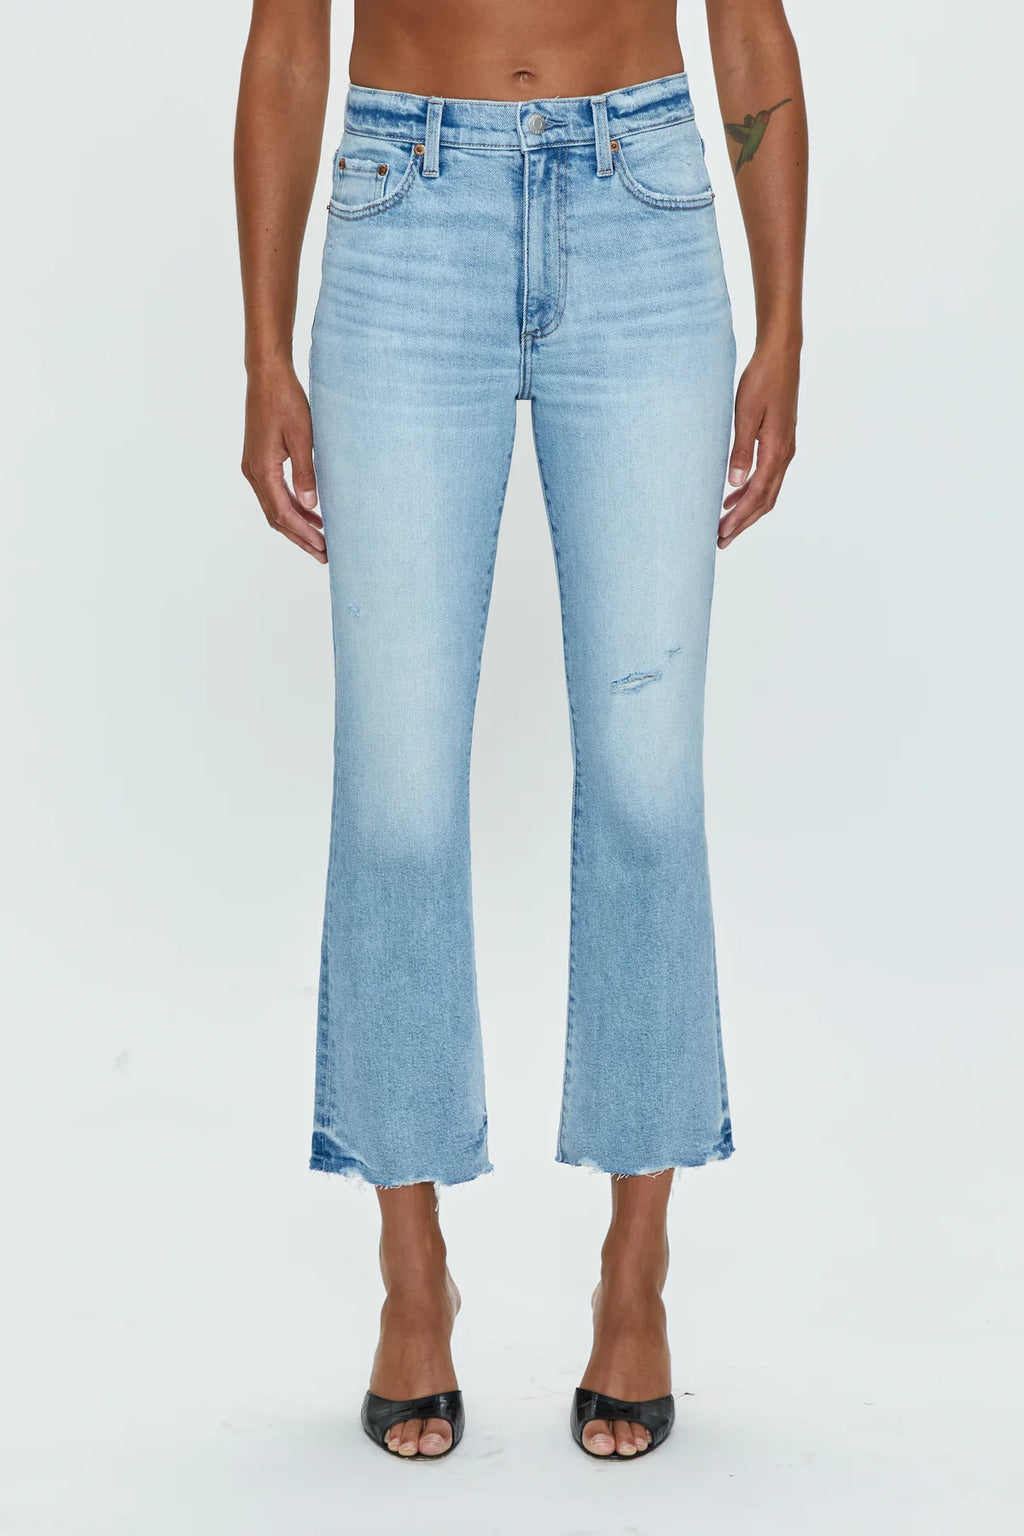 Pistola Lennon High Rise Jeans in Discover Vintage